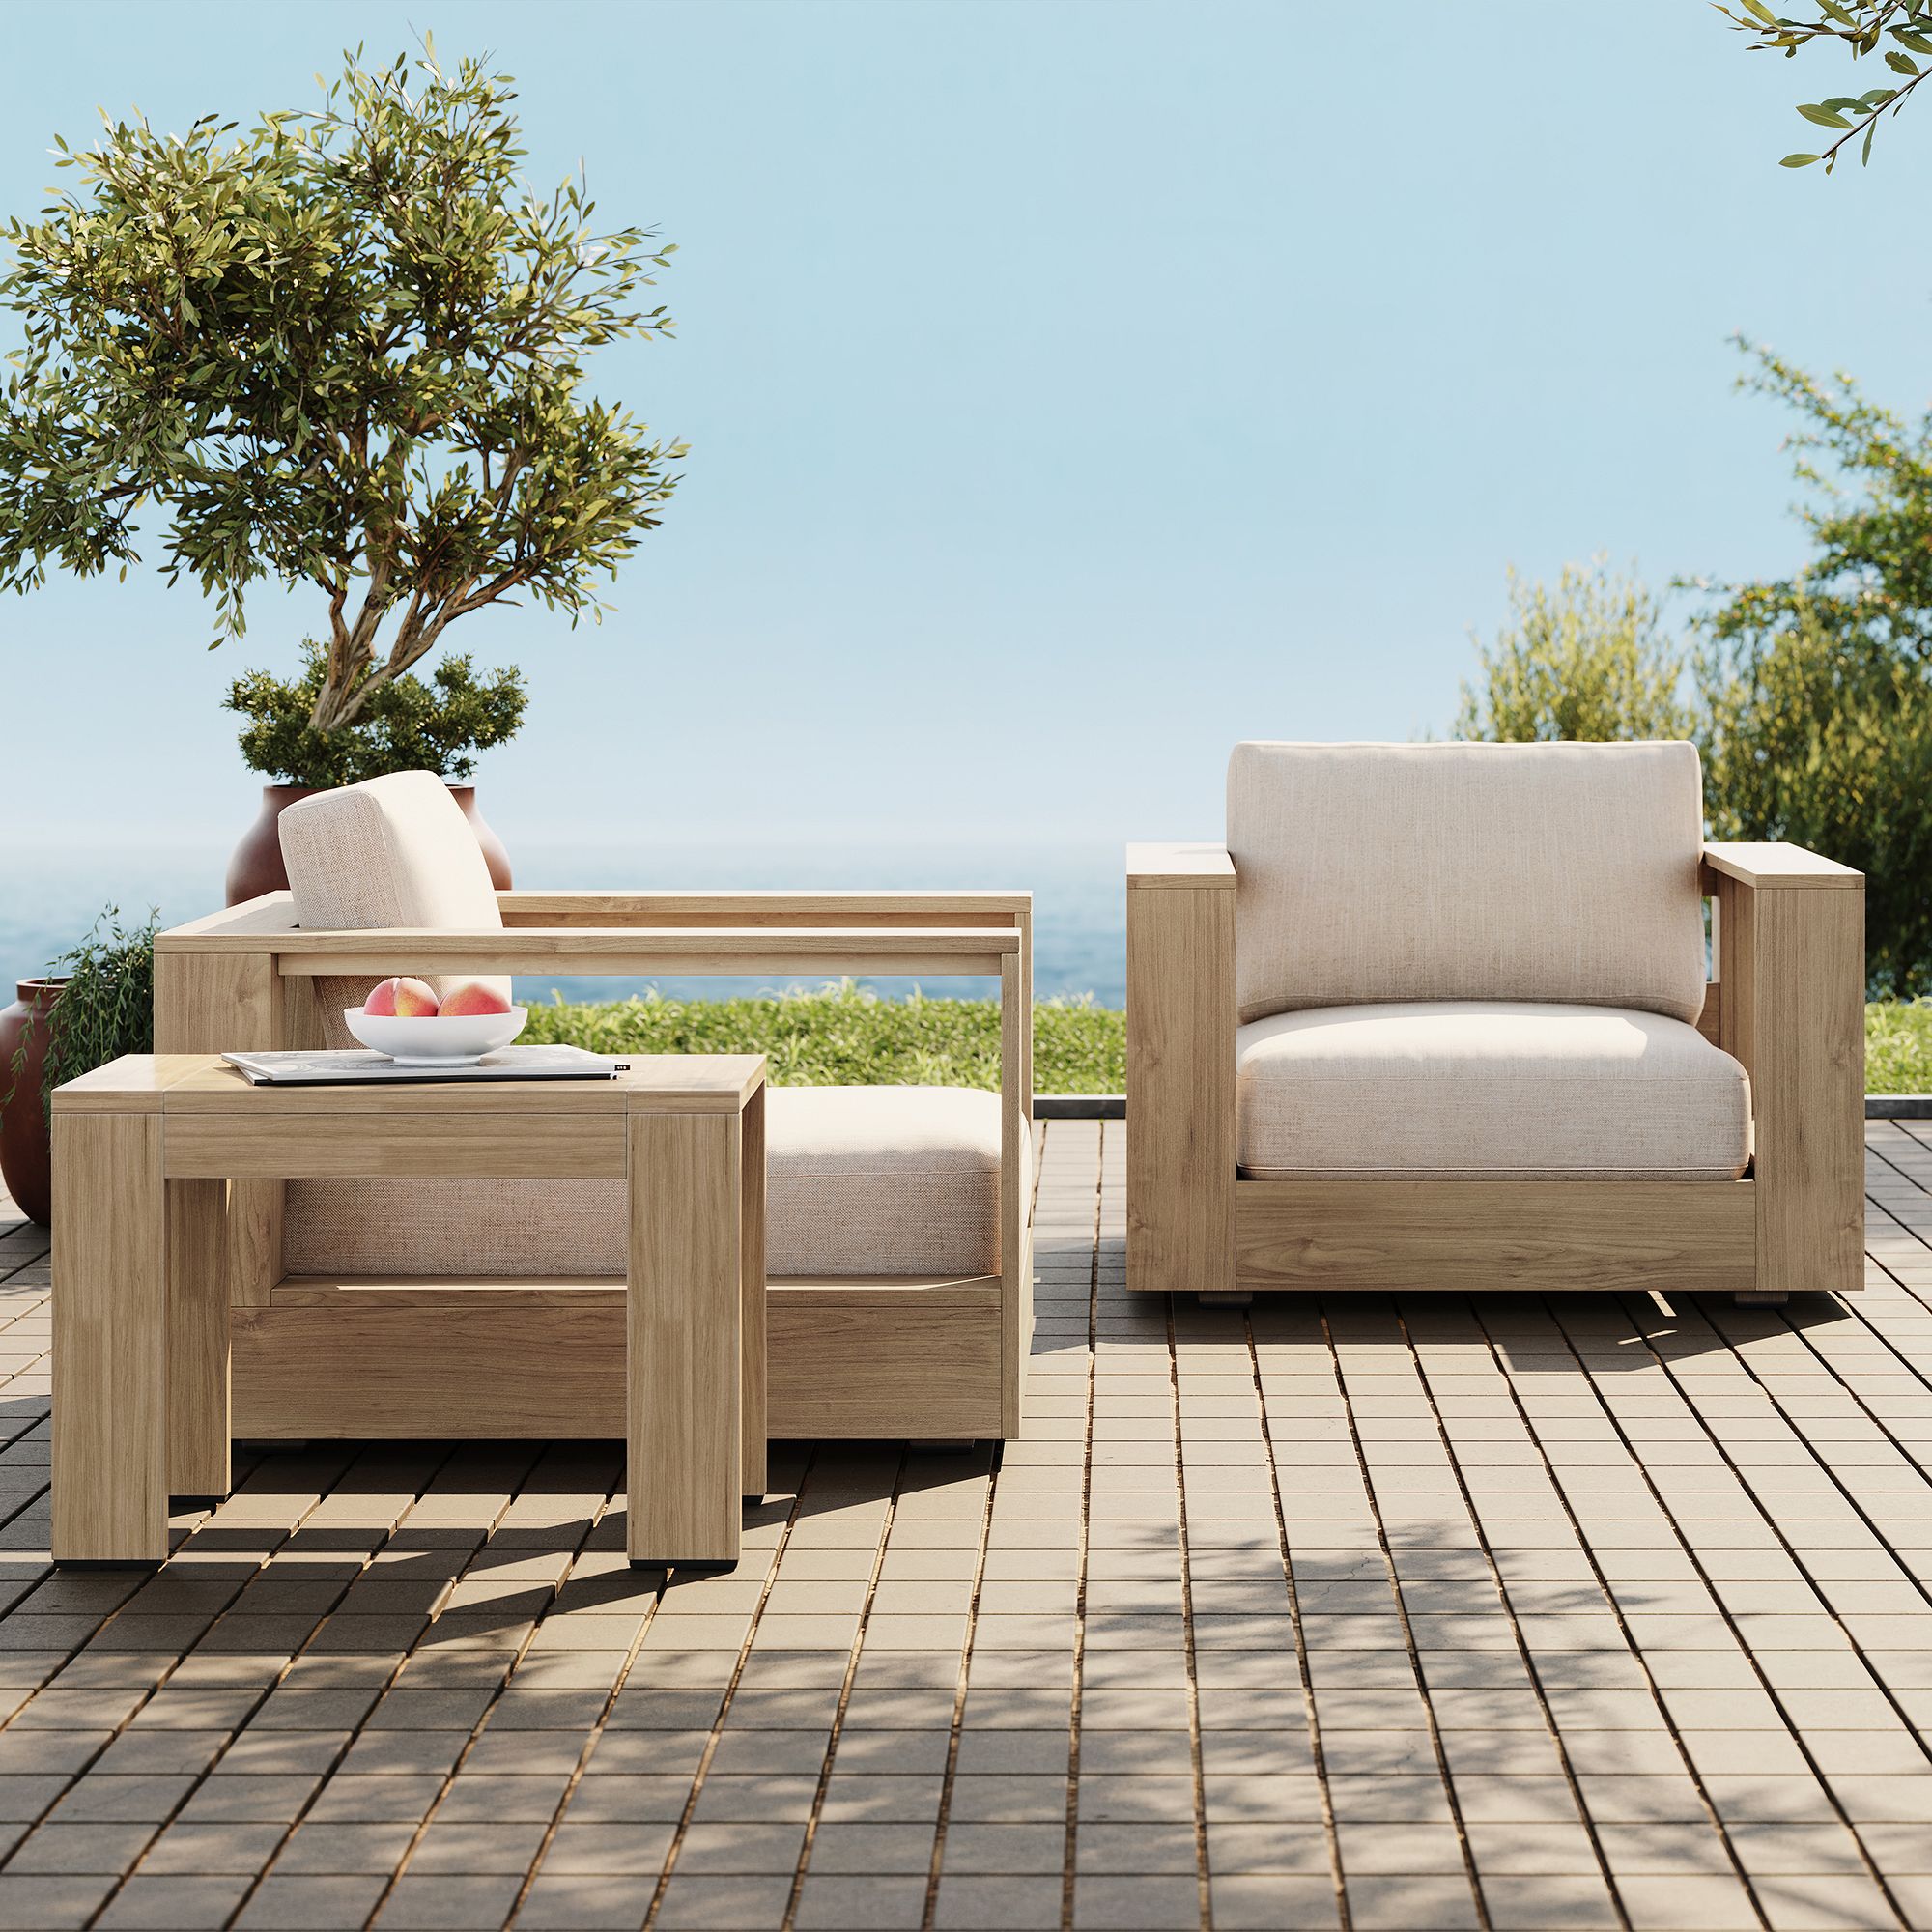 Telluride Outdoor Lounge Chairs & Side Table (29") Set | West Elm